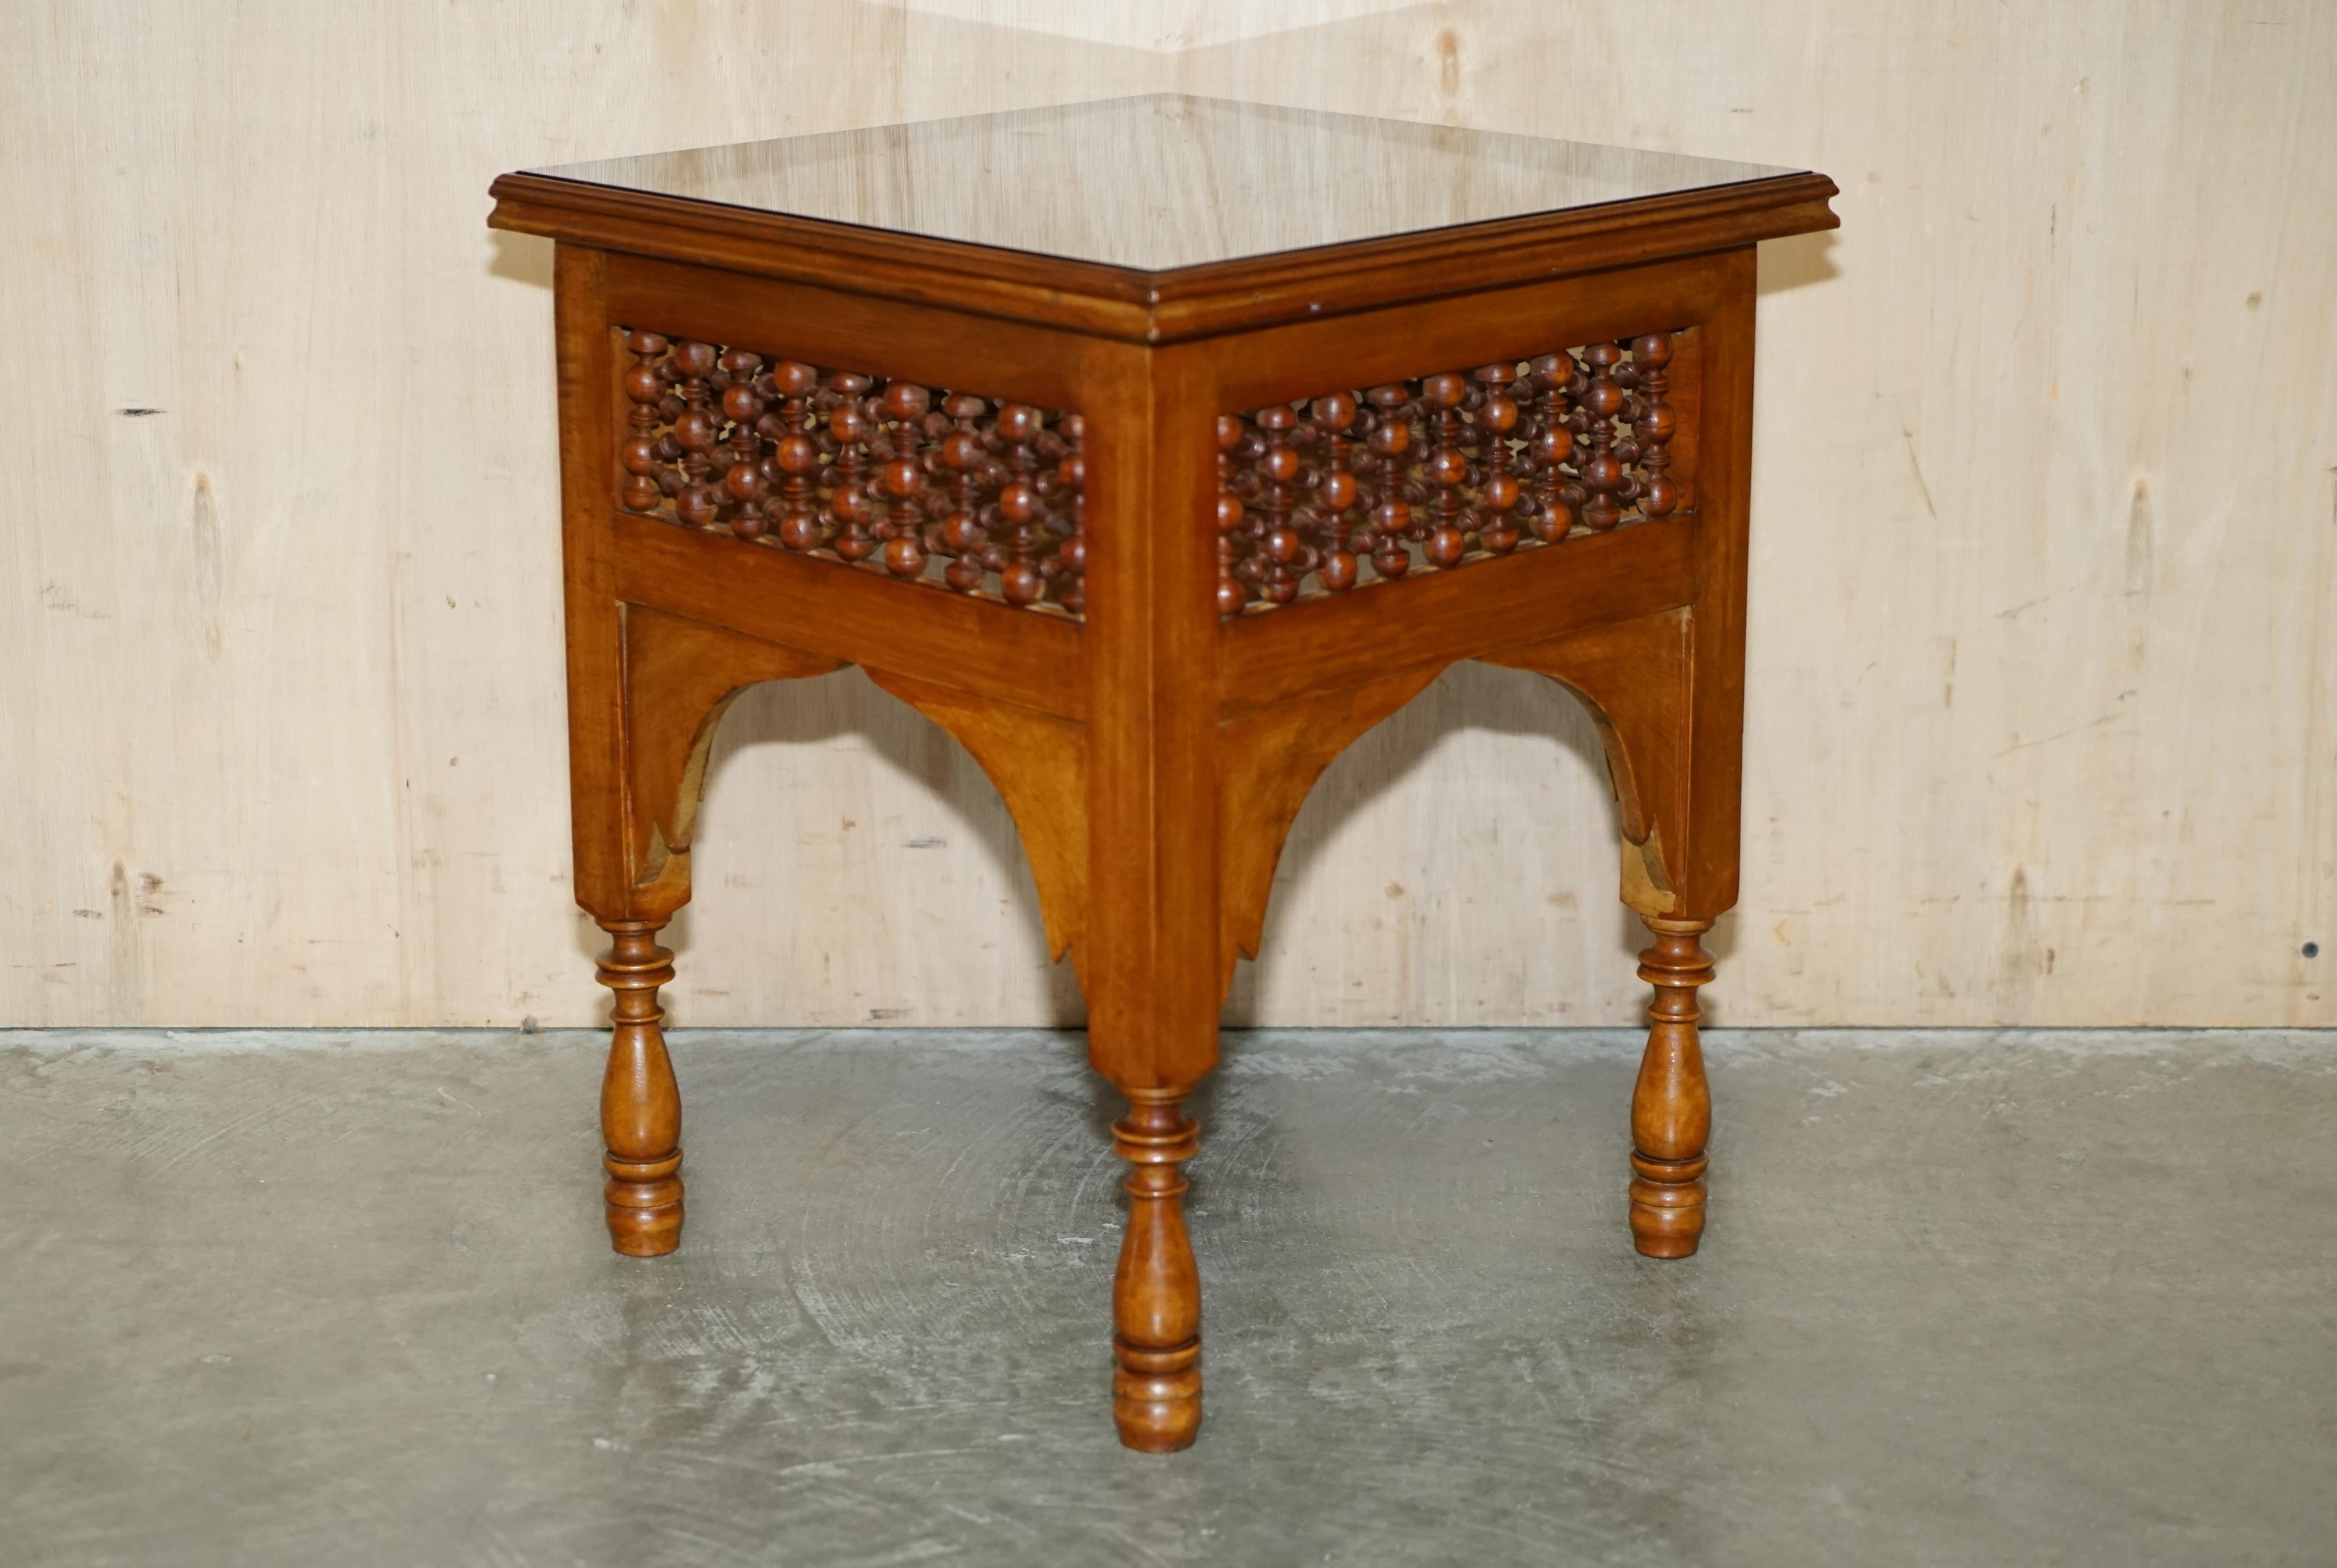 Royal House Antiques

Royal House Antiques is delighted to offer for sale this very nicely crafted late 19th century Morrish side table which was retailed through Liberty's London

Please note the delivery fee listed is just a guide, it covers